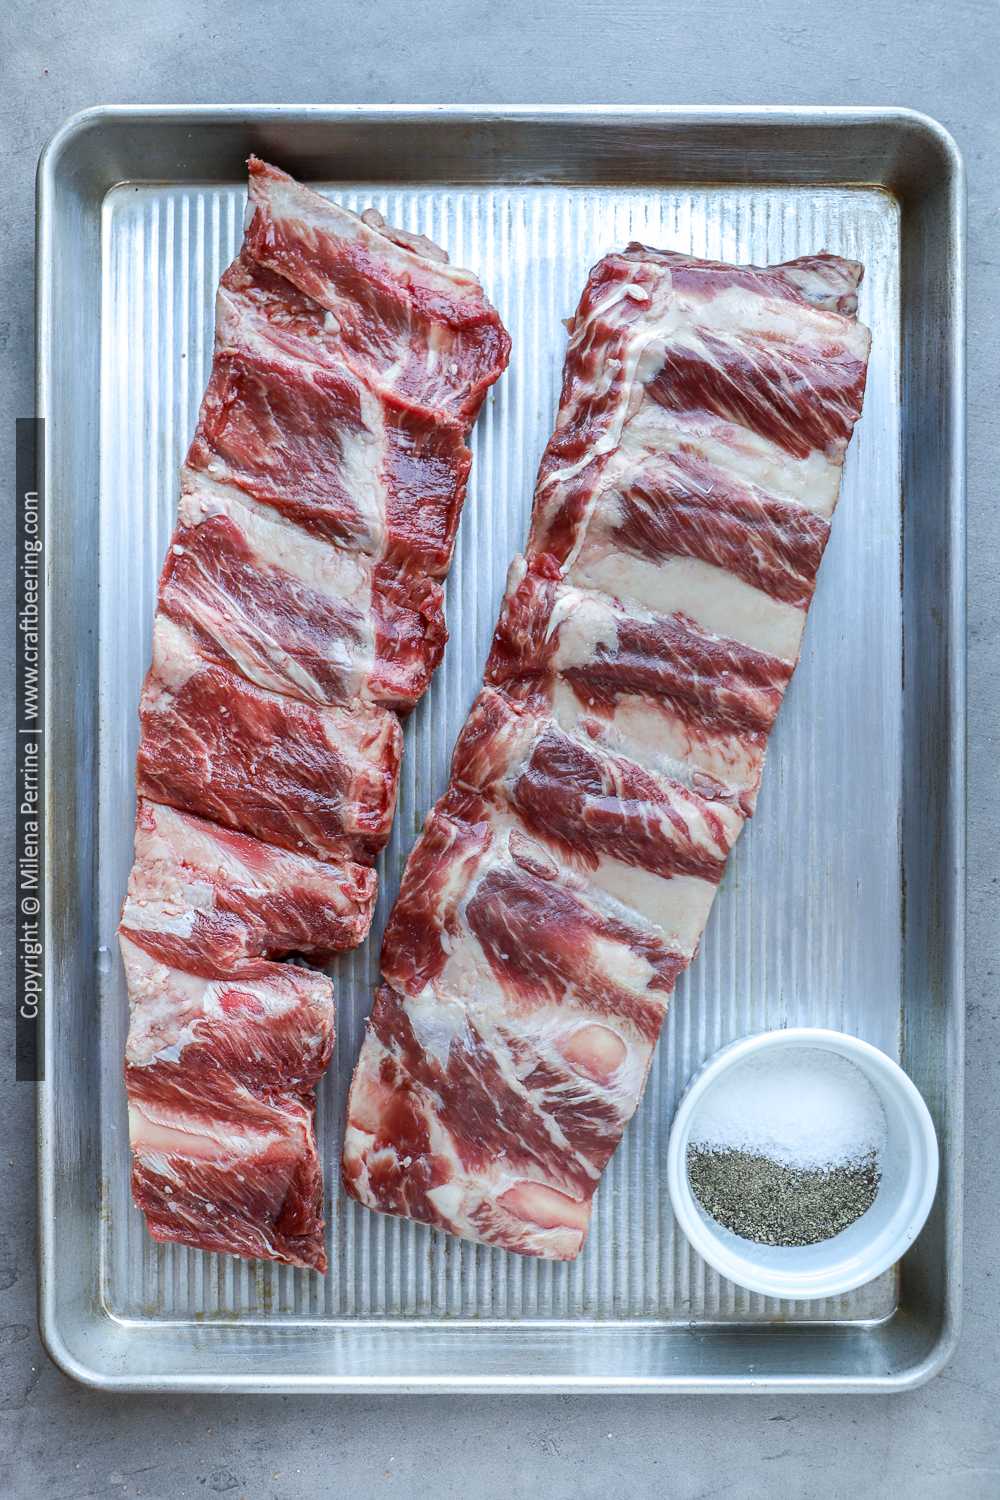 Raw beef back ribs. Two racks shown with meaty side up.